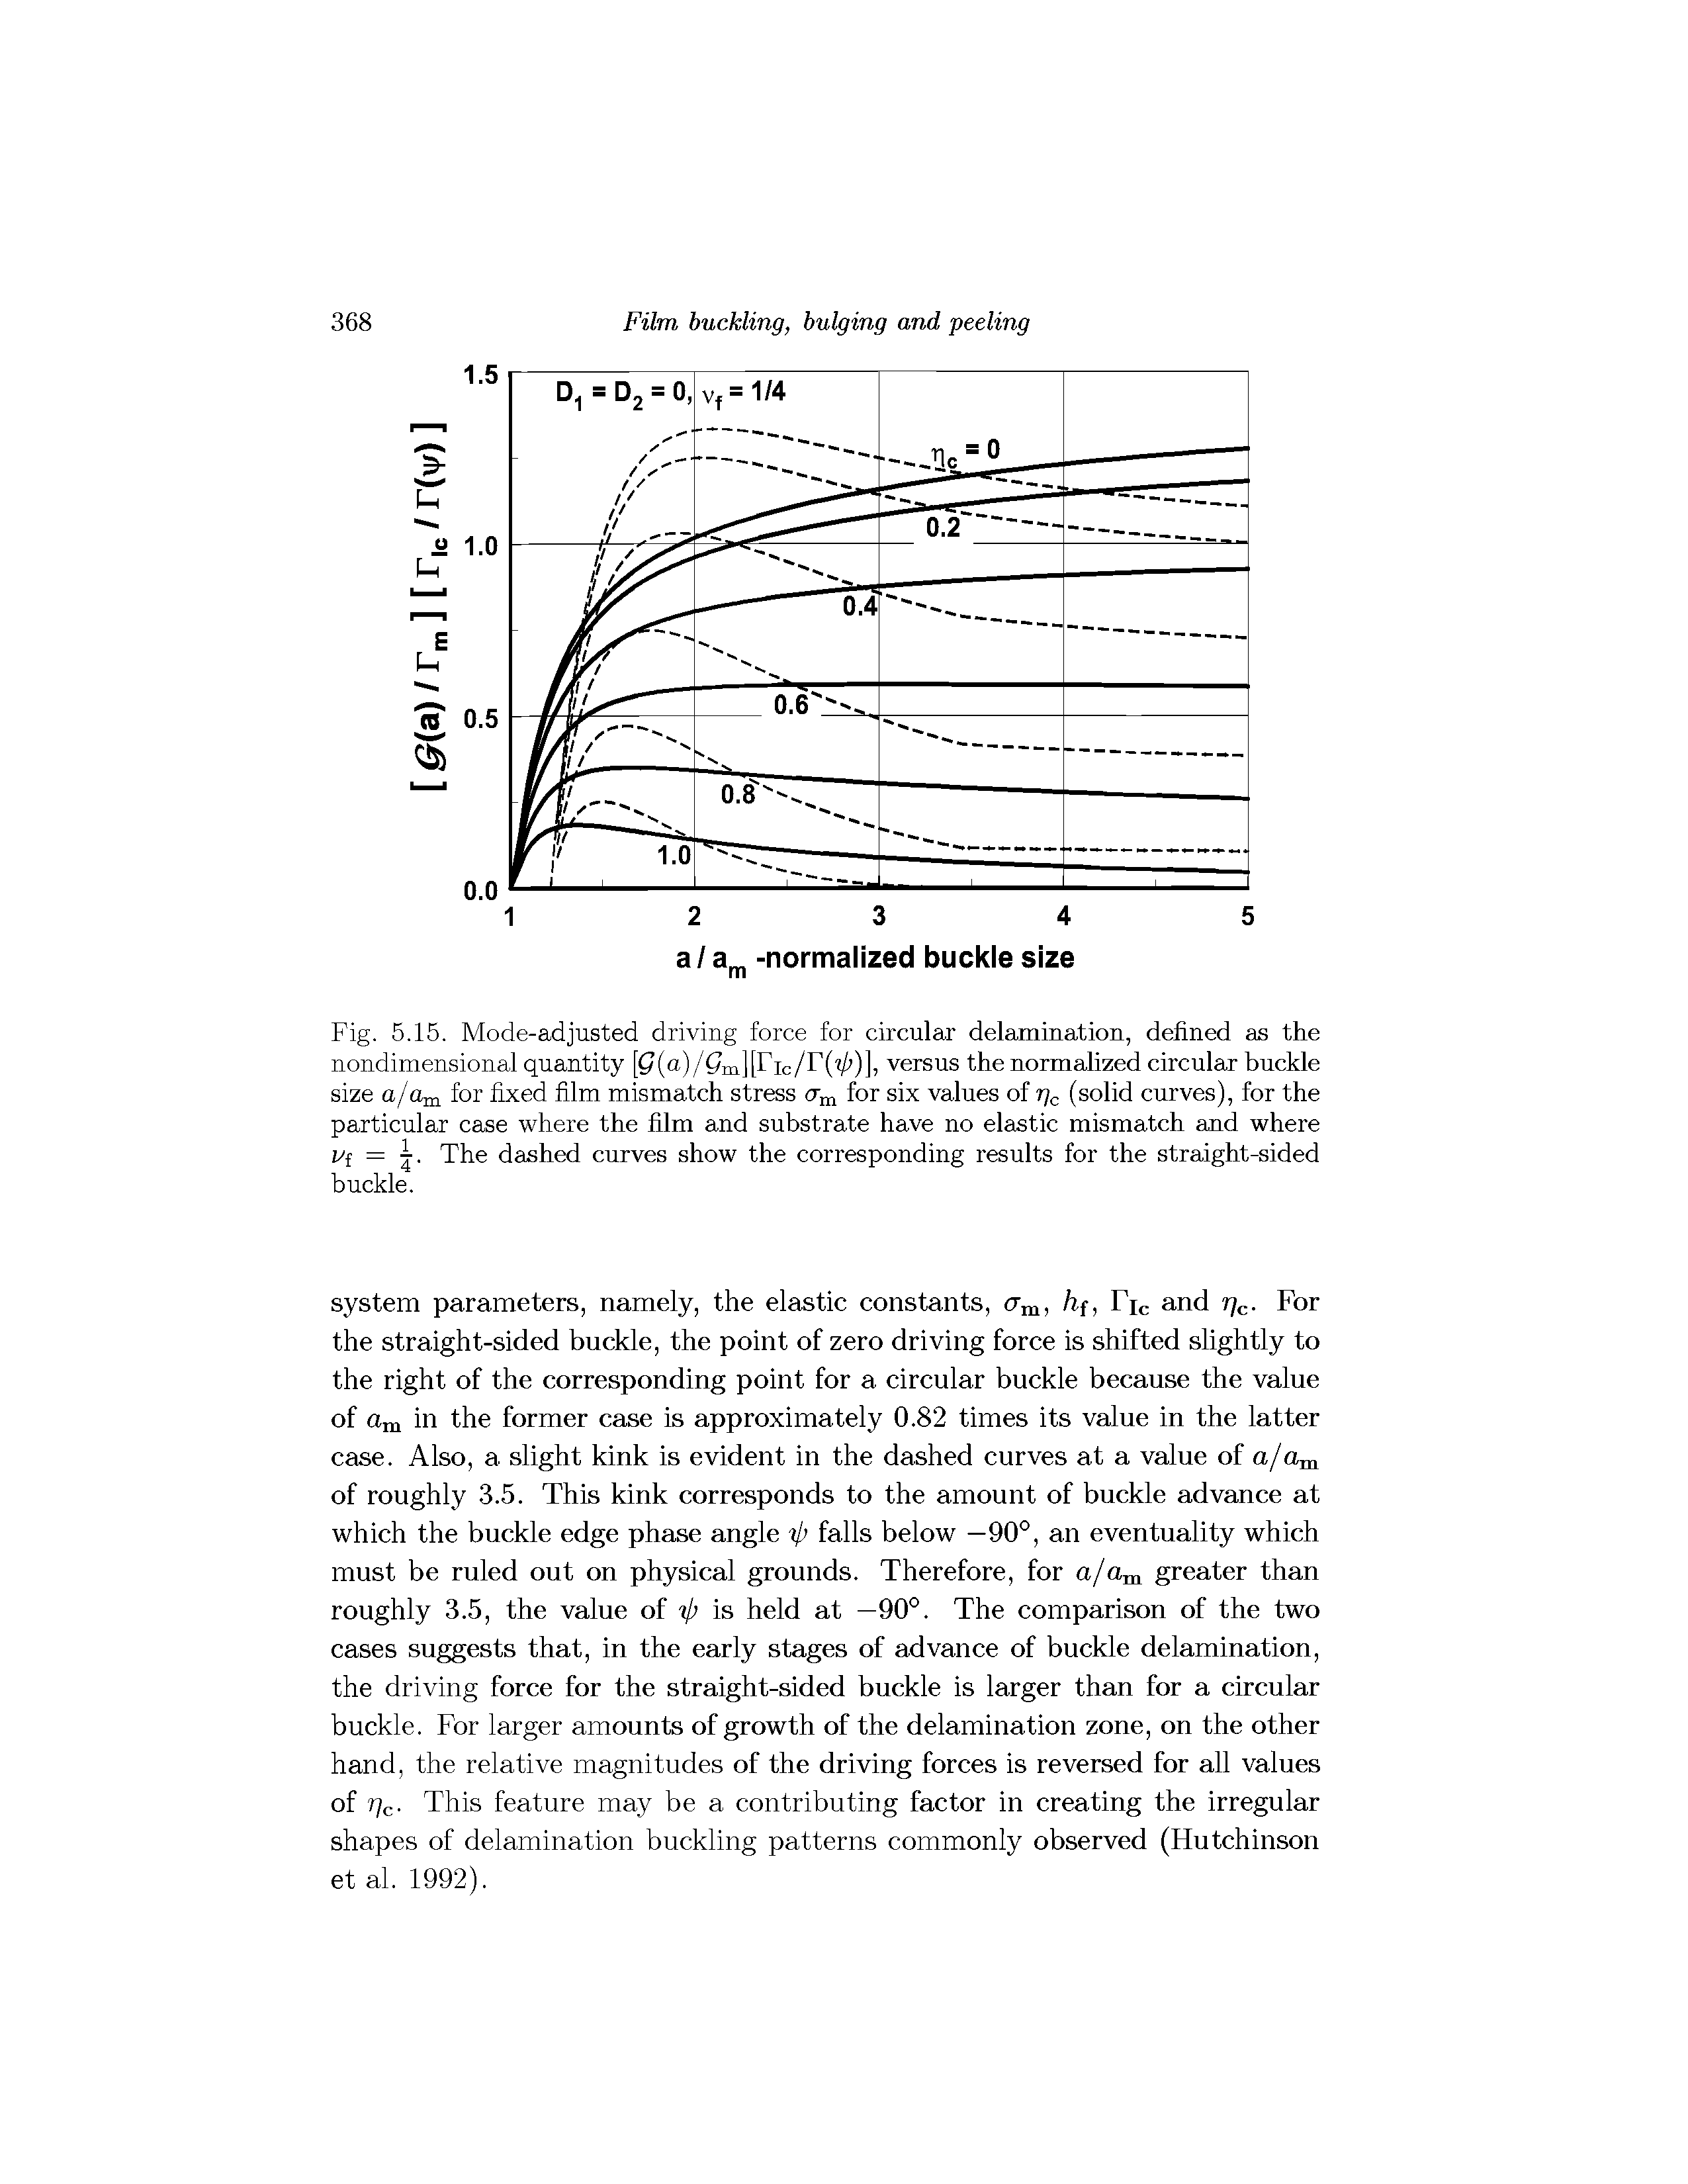 Fig. 5.15. Mode-adjusted driving force for circular delamination, defined as the nondimensional quantity versus the normalized circular buckle...